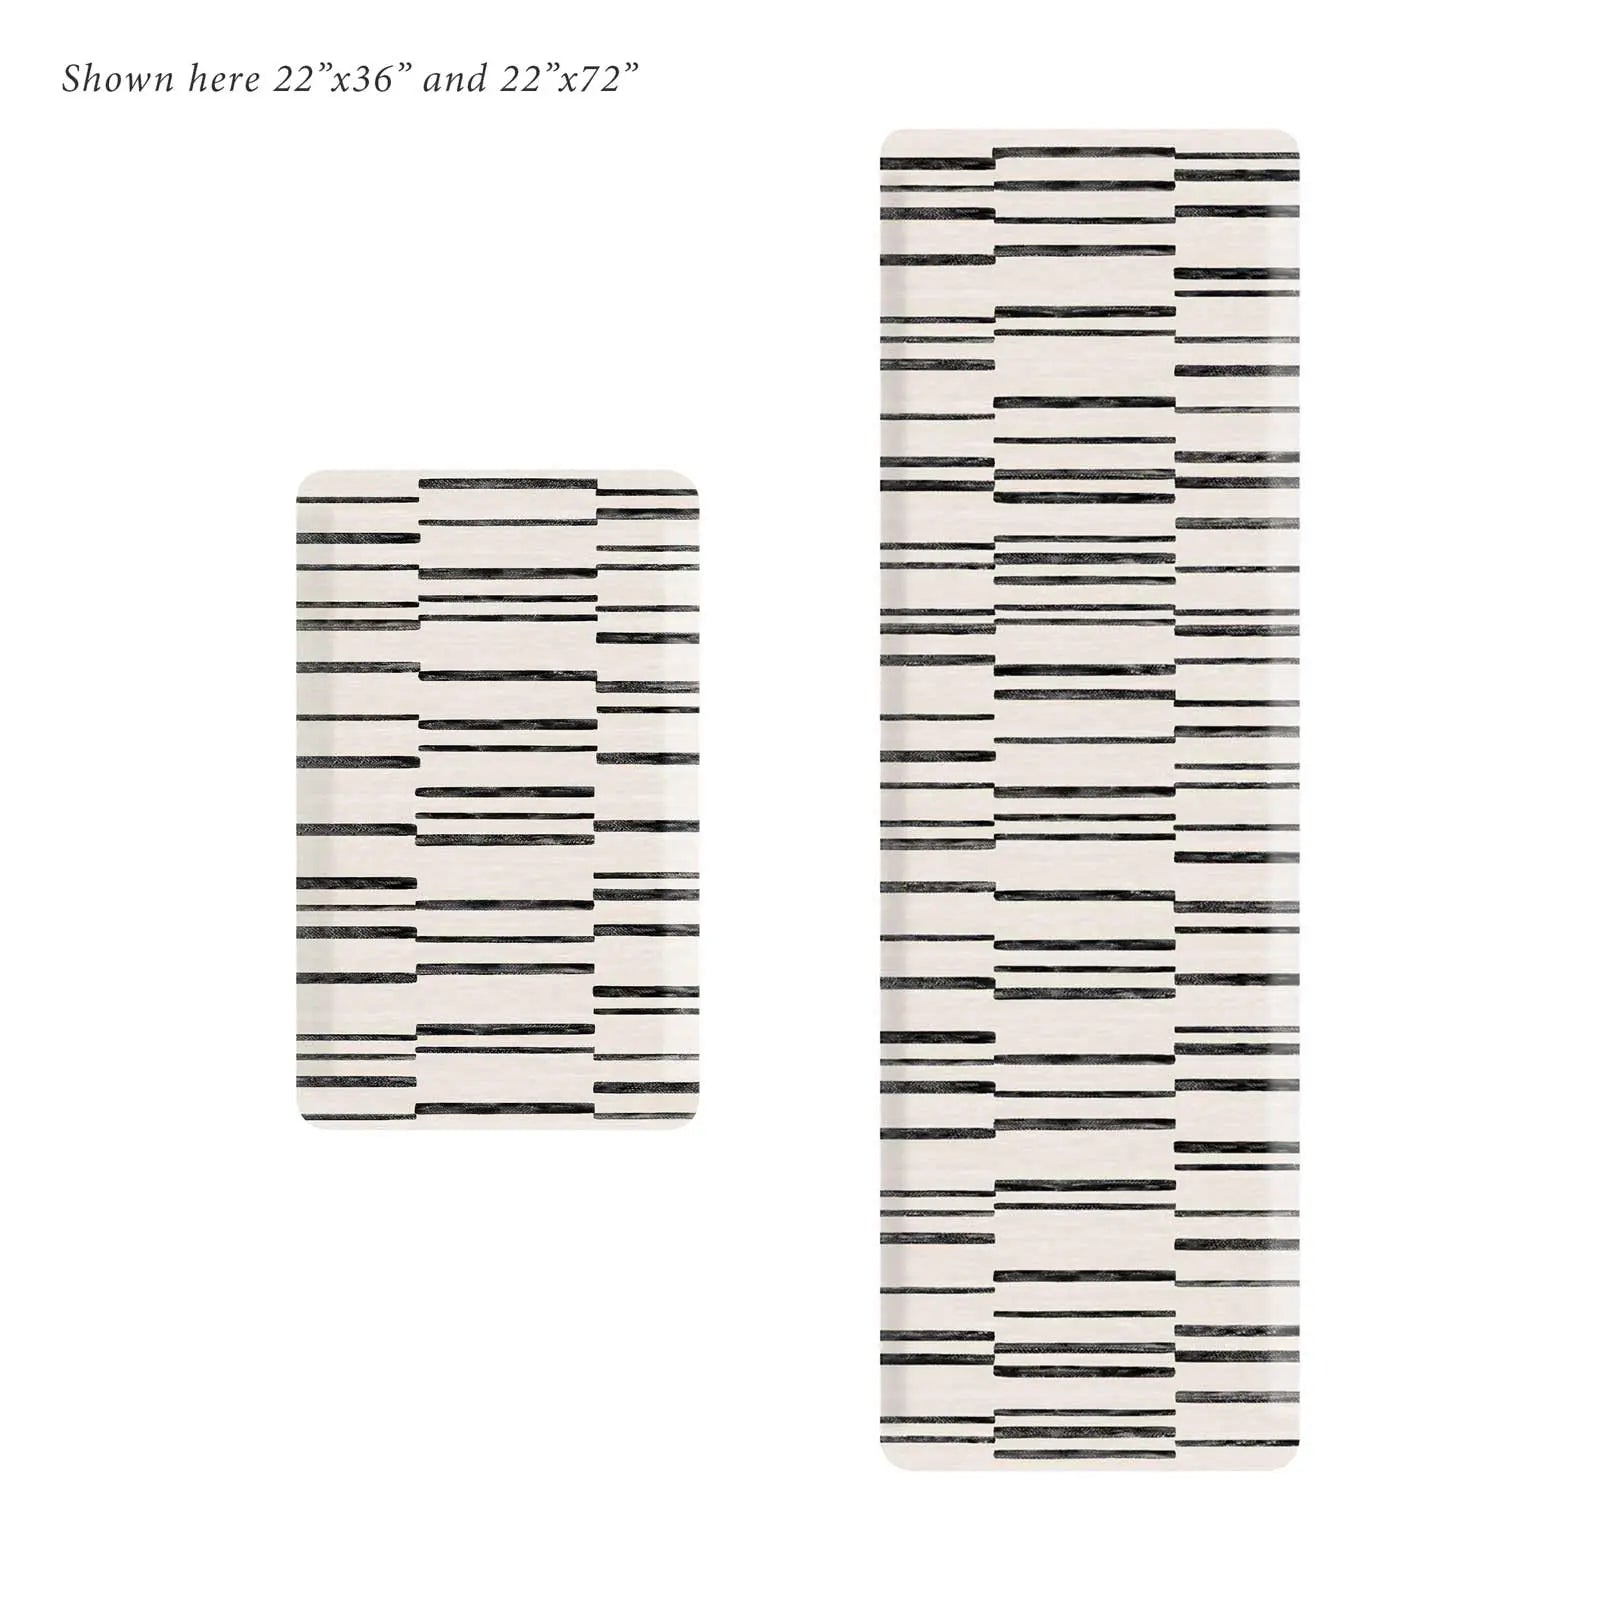 Black and White Minimal Inverted Stripe Print Standing Mat shown in size 22x36 and 22x72